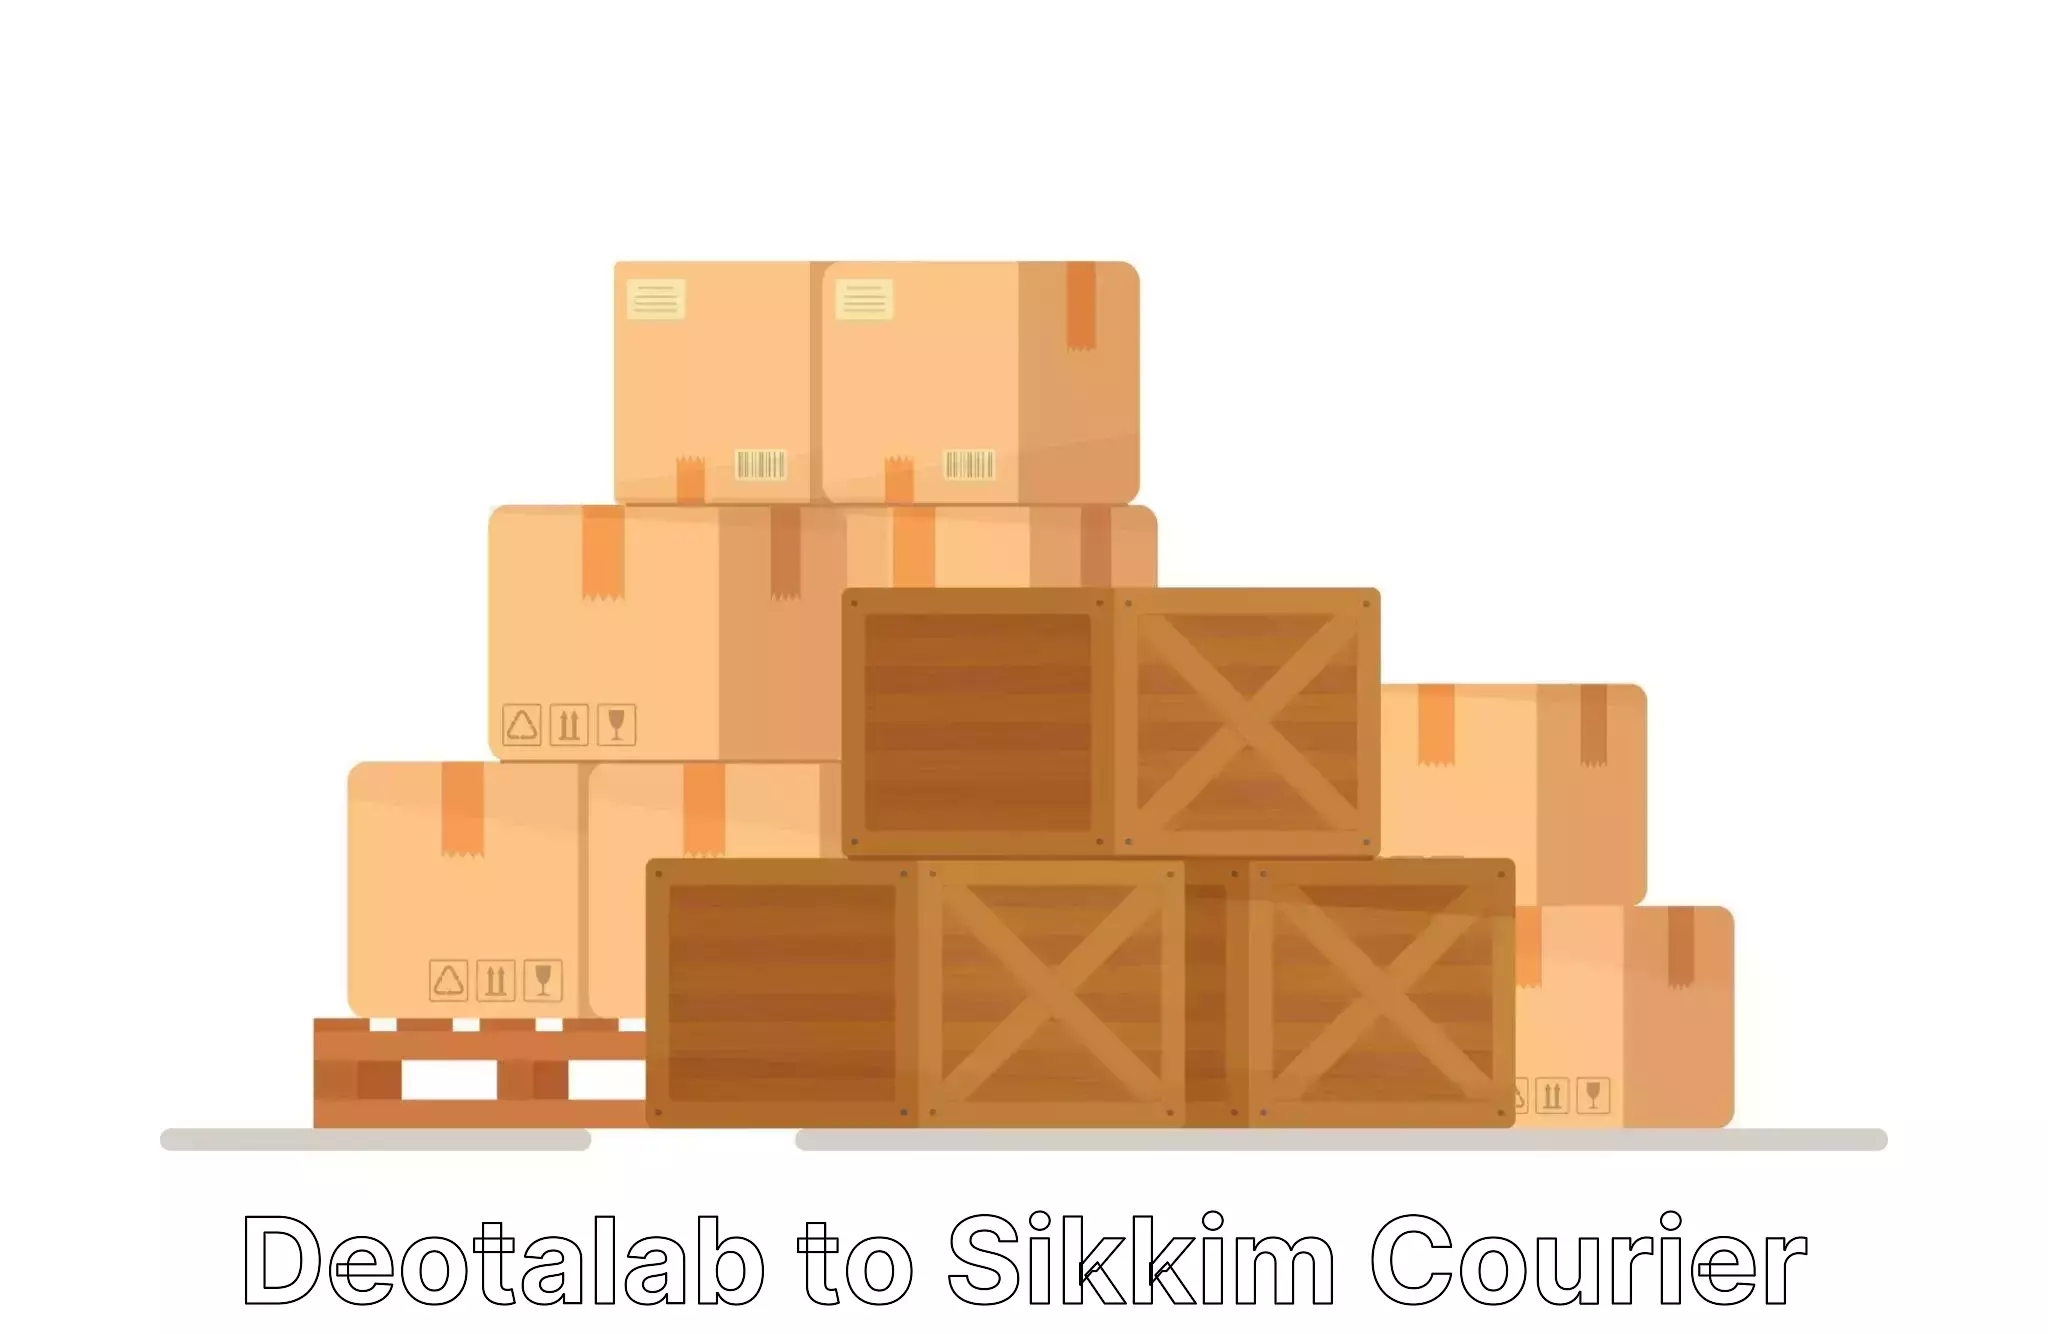 Professional moving company Deotalab to Sikkim